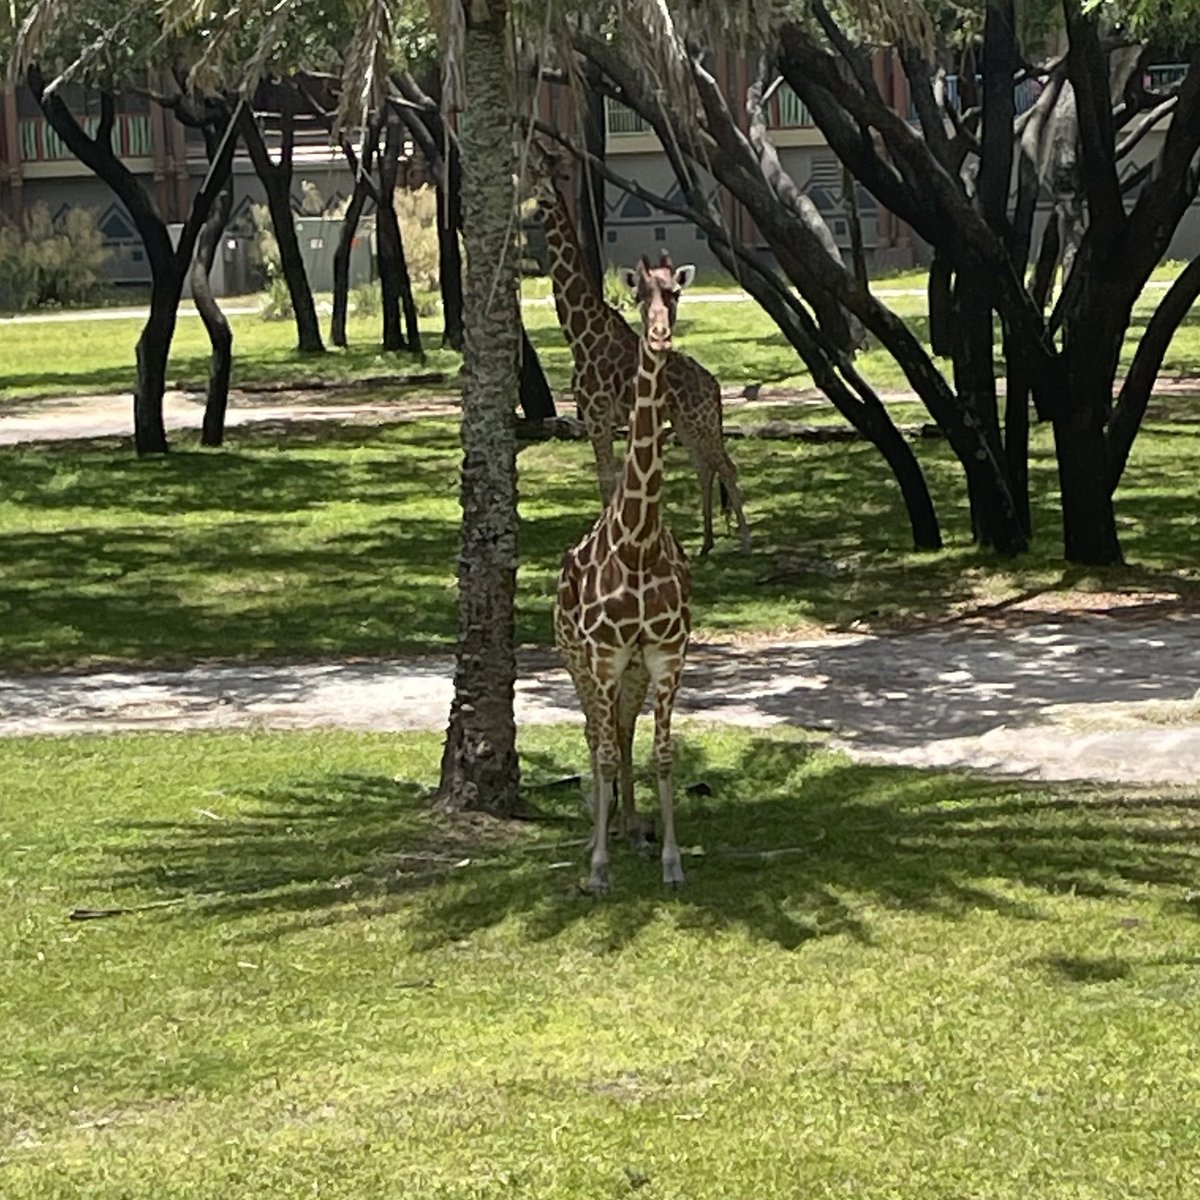 Being stared at by a giraffe is surprisingly uncomfortable